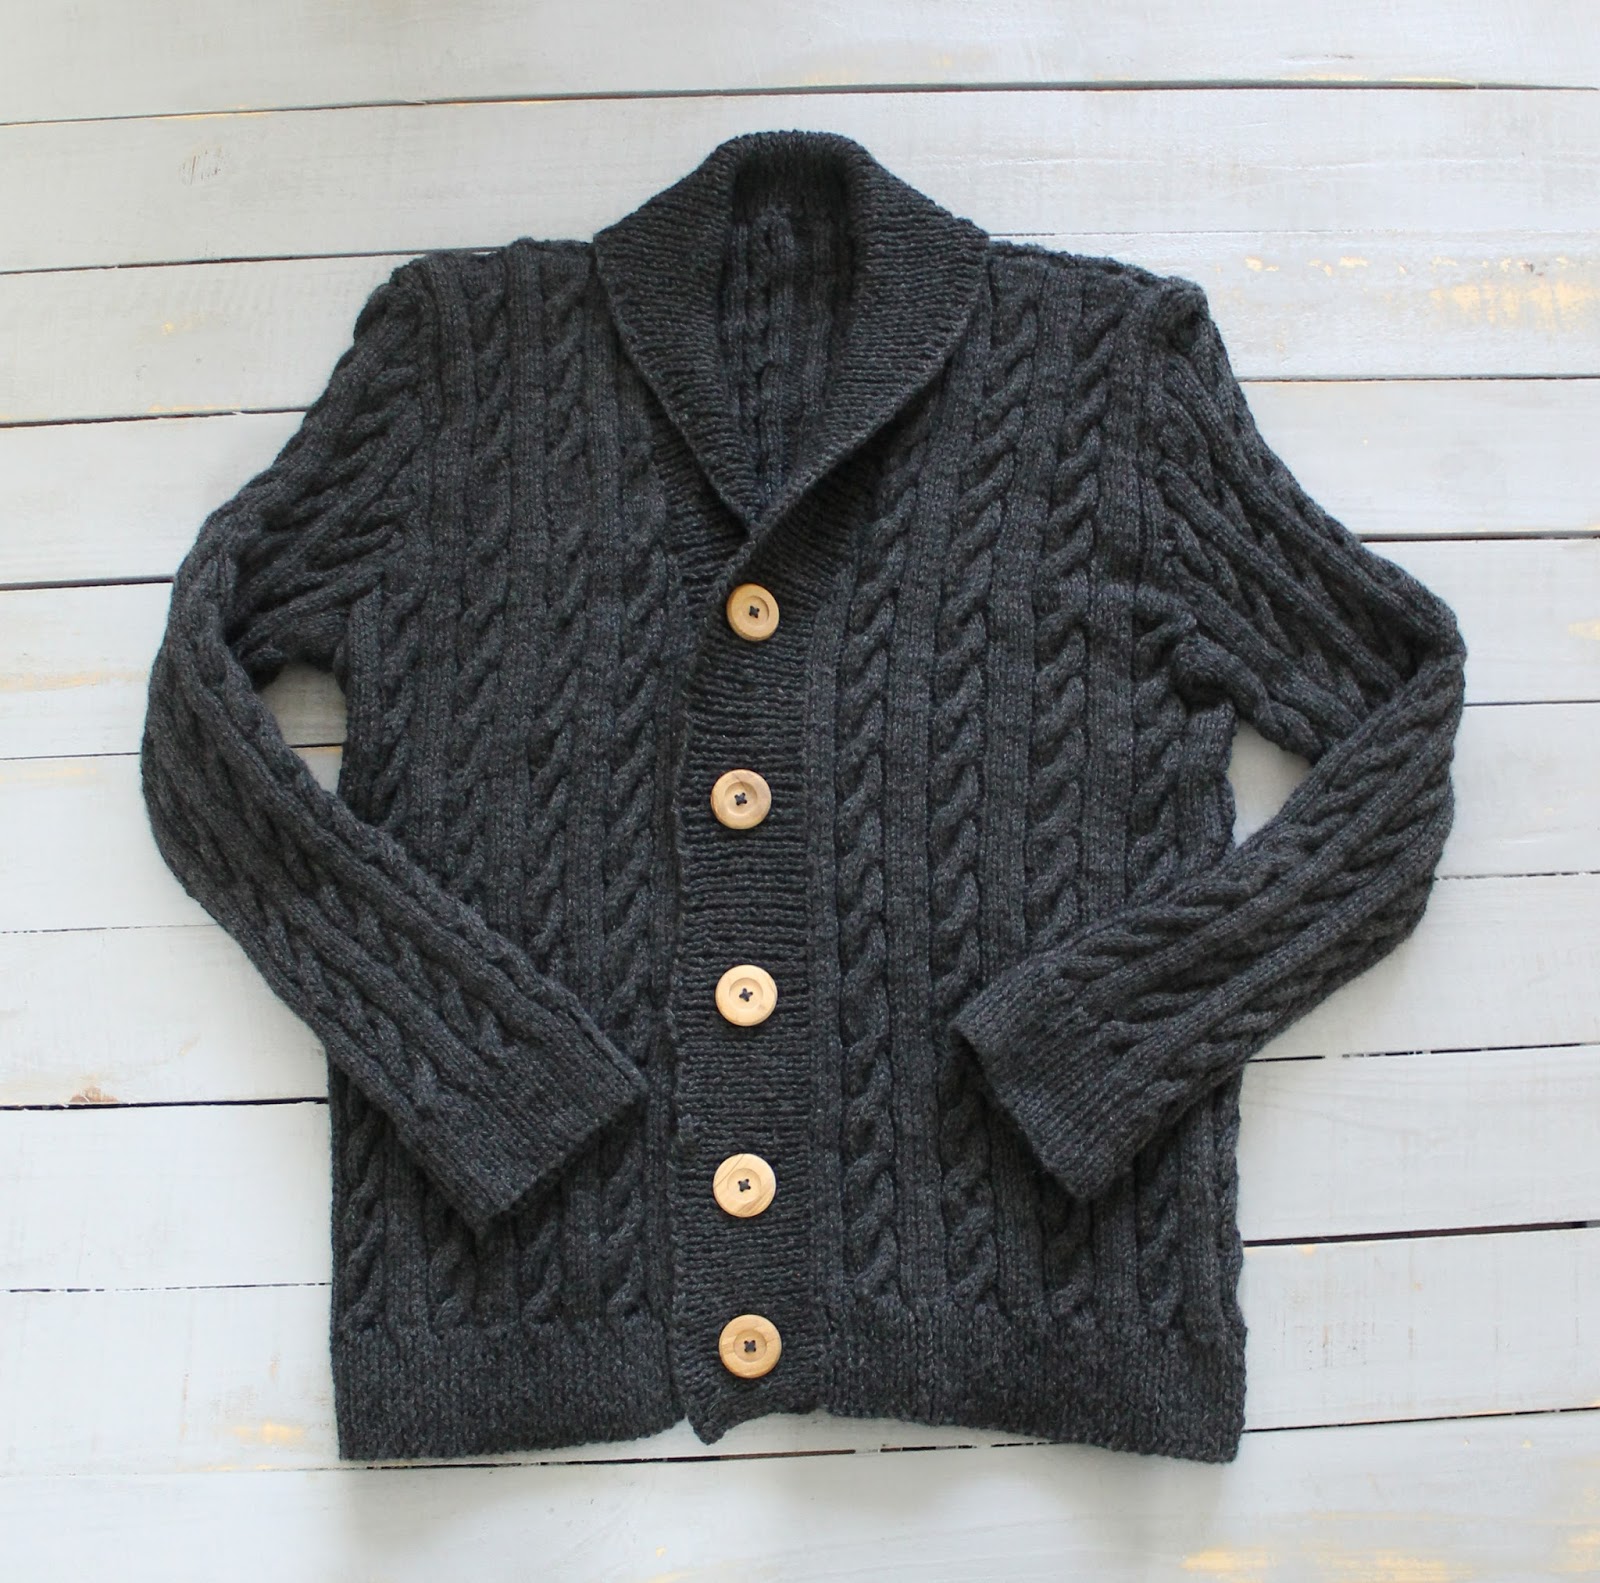 The Feisty Redhead: Men's Knit Cabled Cardigan